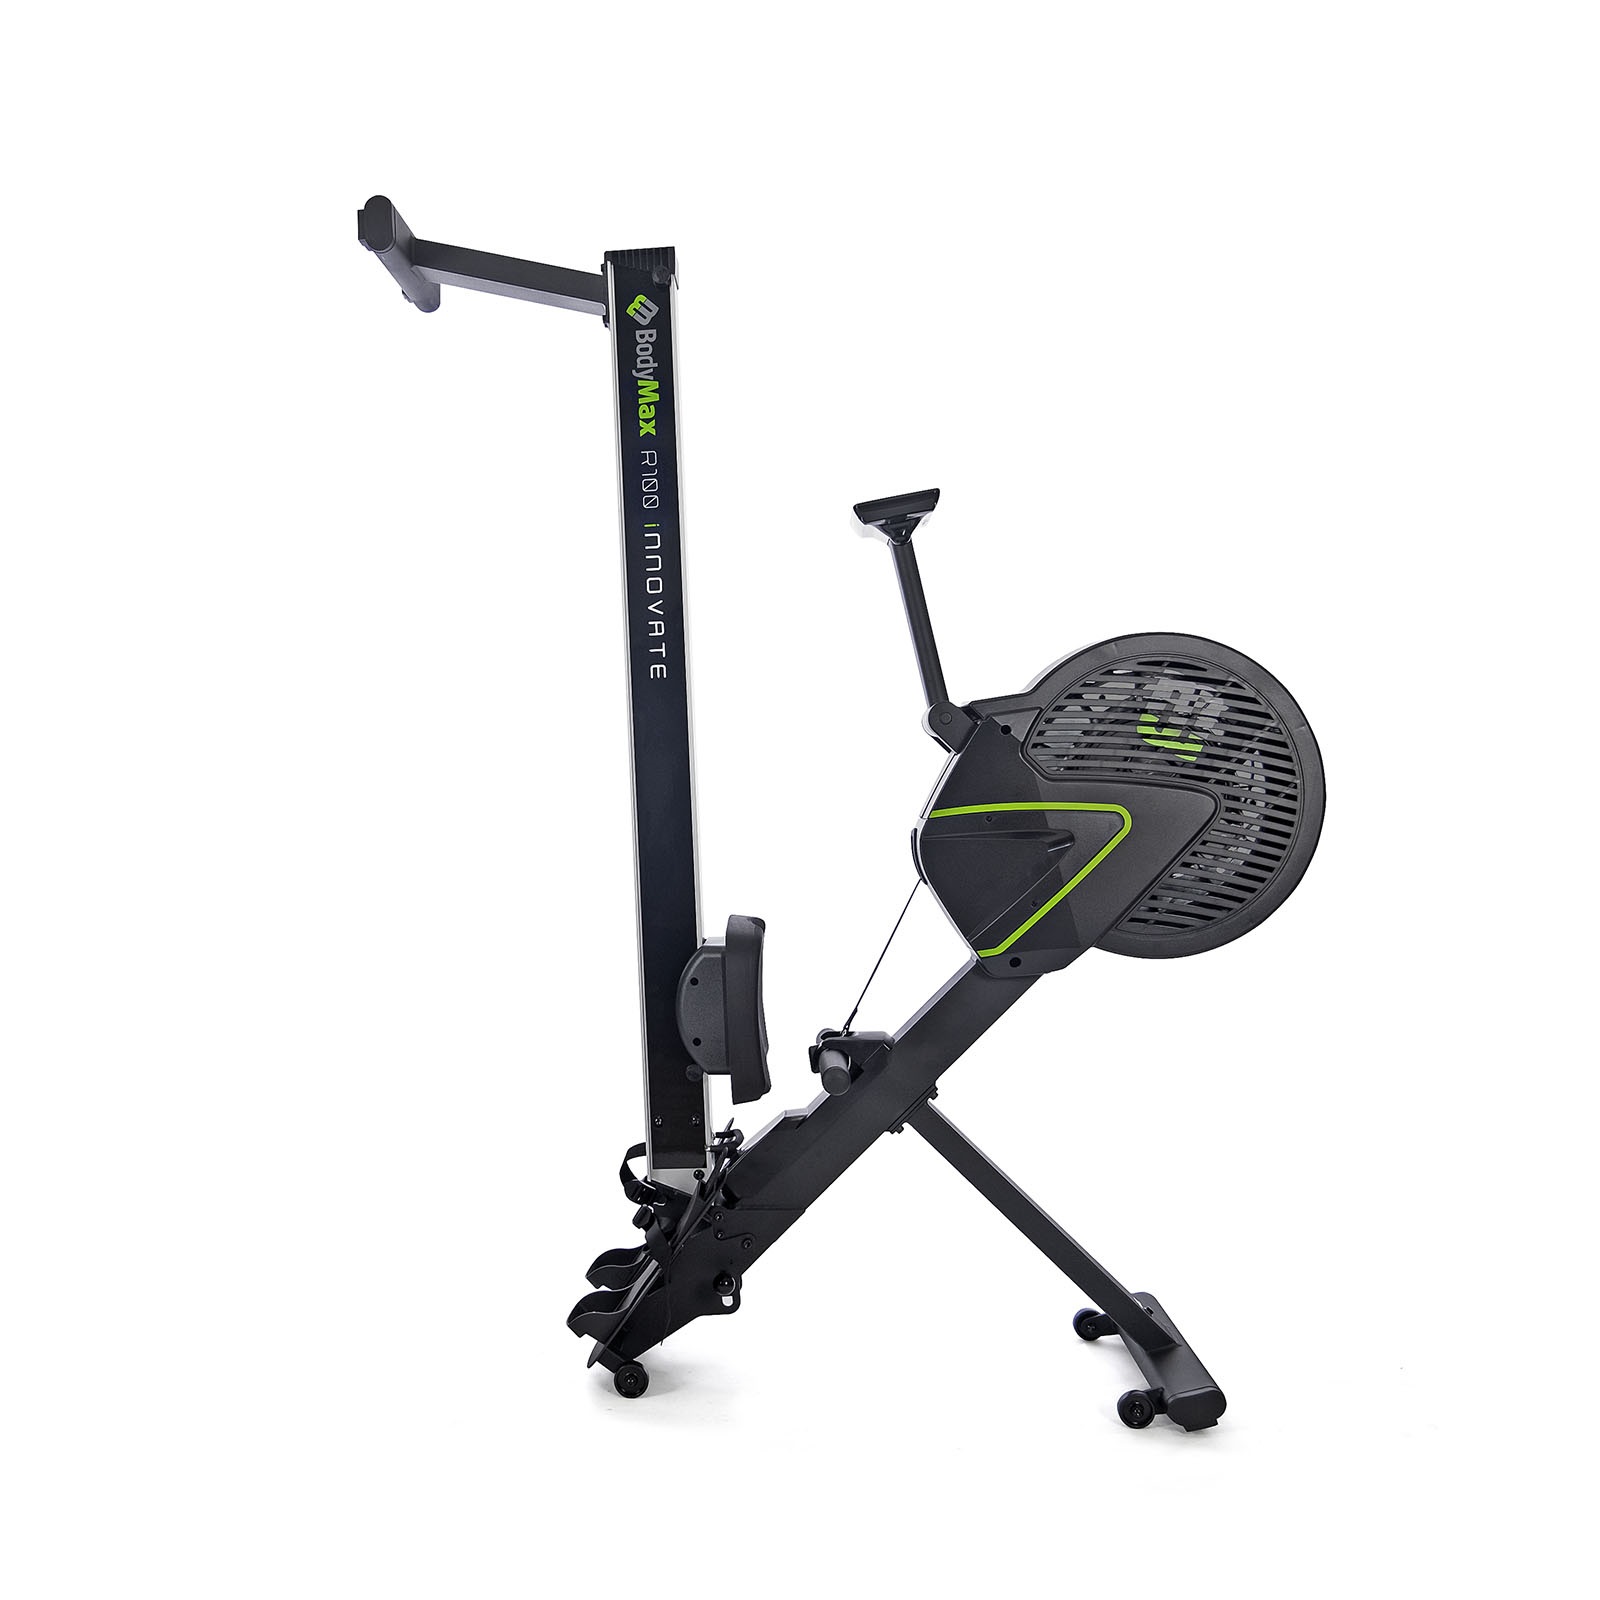 BodyMax R100 Air Rower with Magnetic Resistance